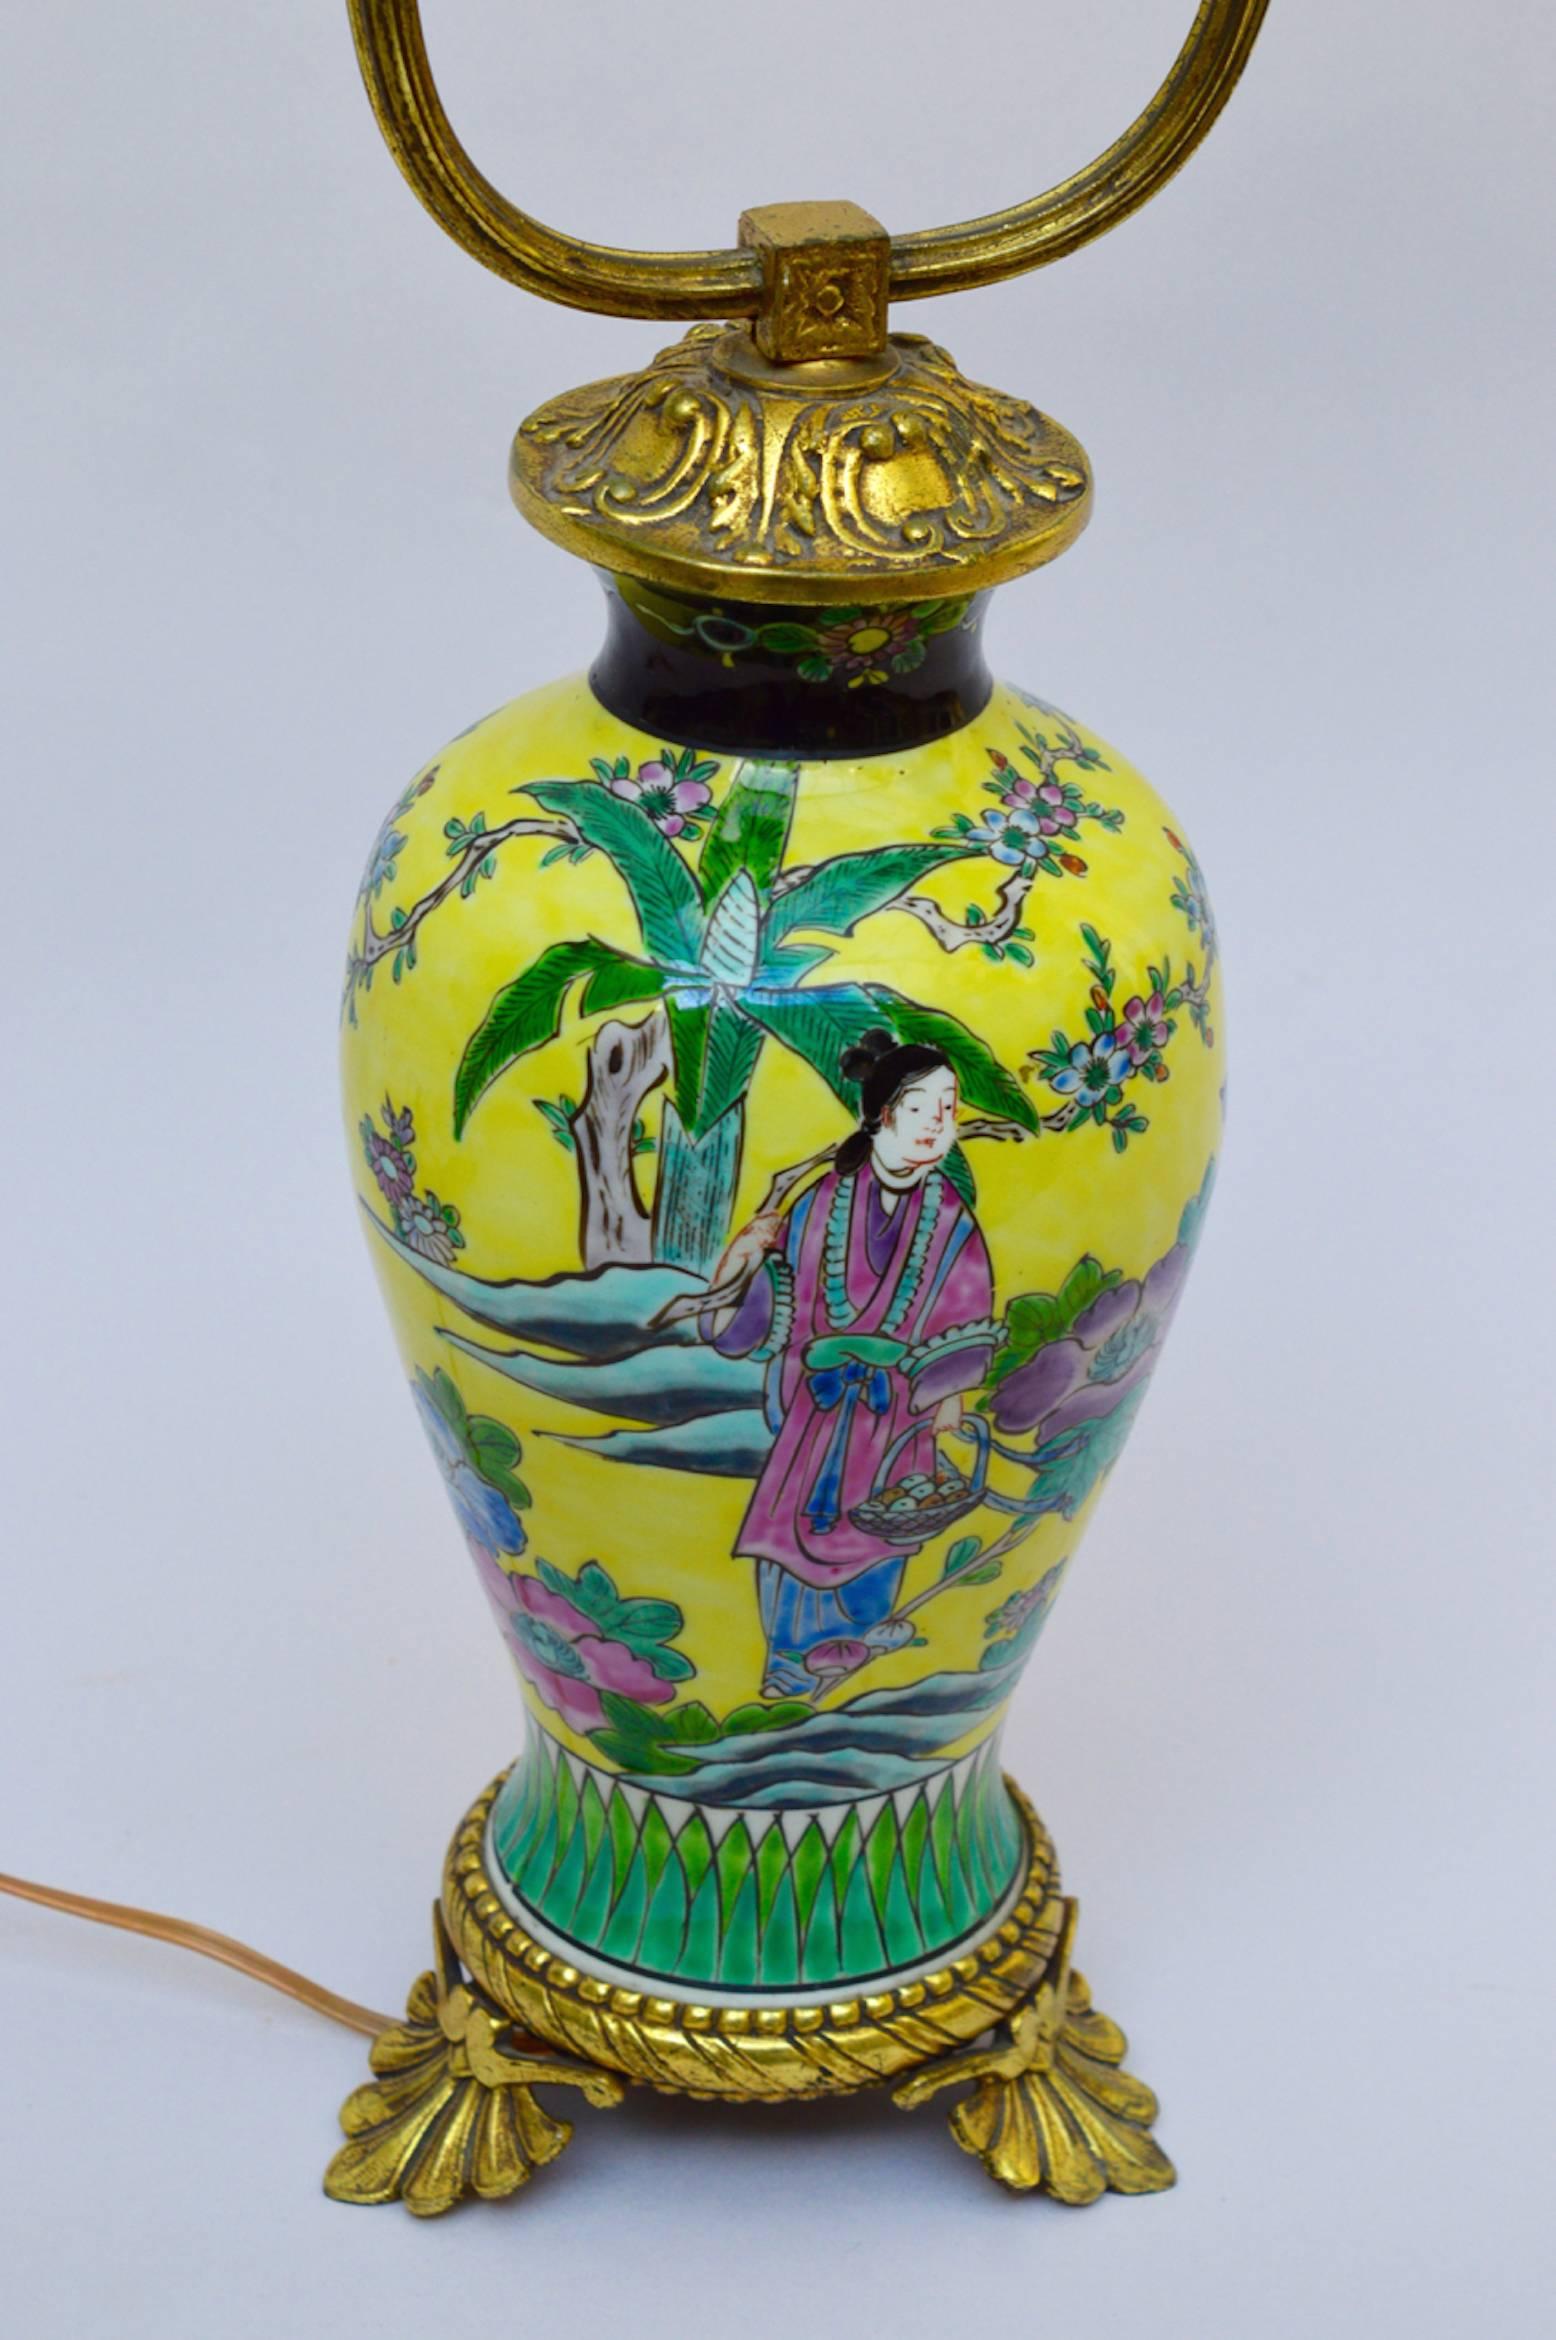 A brilliant yellow Chinese export  glazed porcelain vase converted into a lamp in France in the 1930s.
A tropical Chinese scene is painted in vivid yellow green and pink set off with black and mounted with stylized empire bronze mounts. 
A rare find